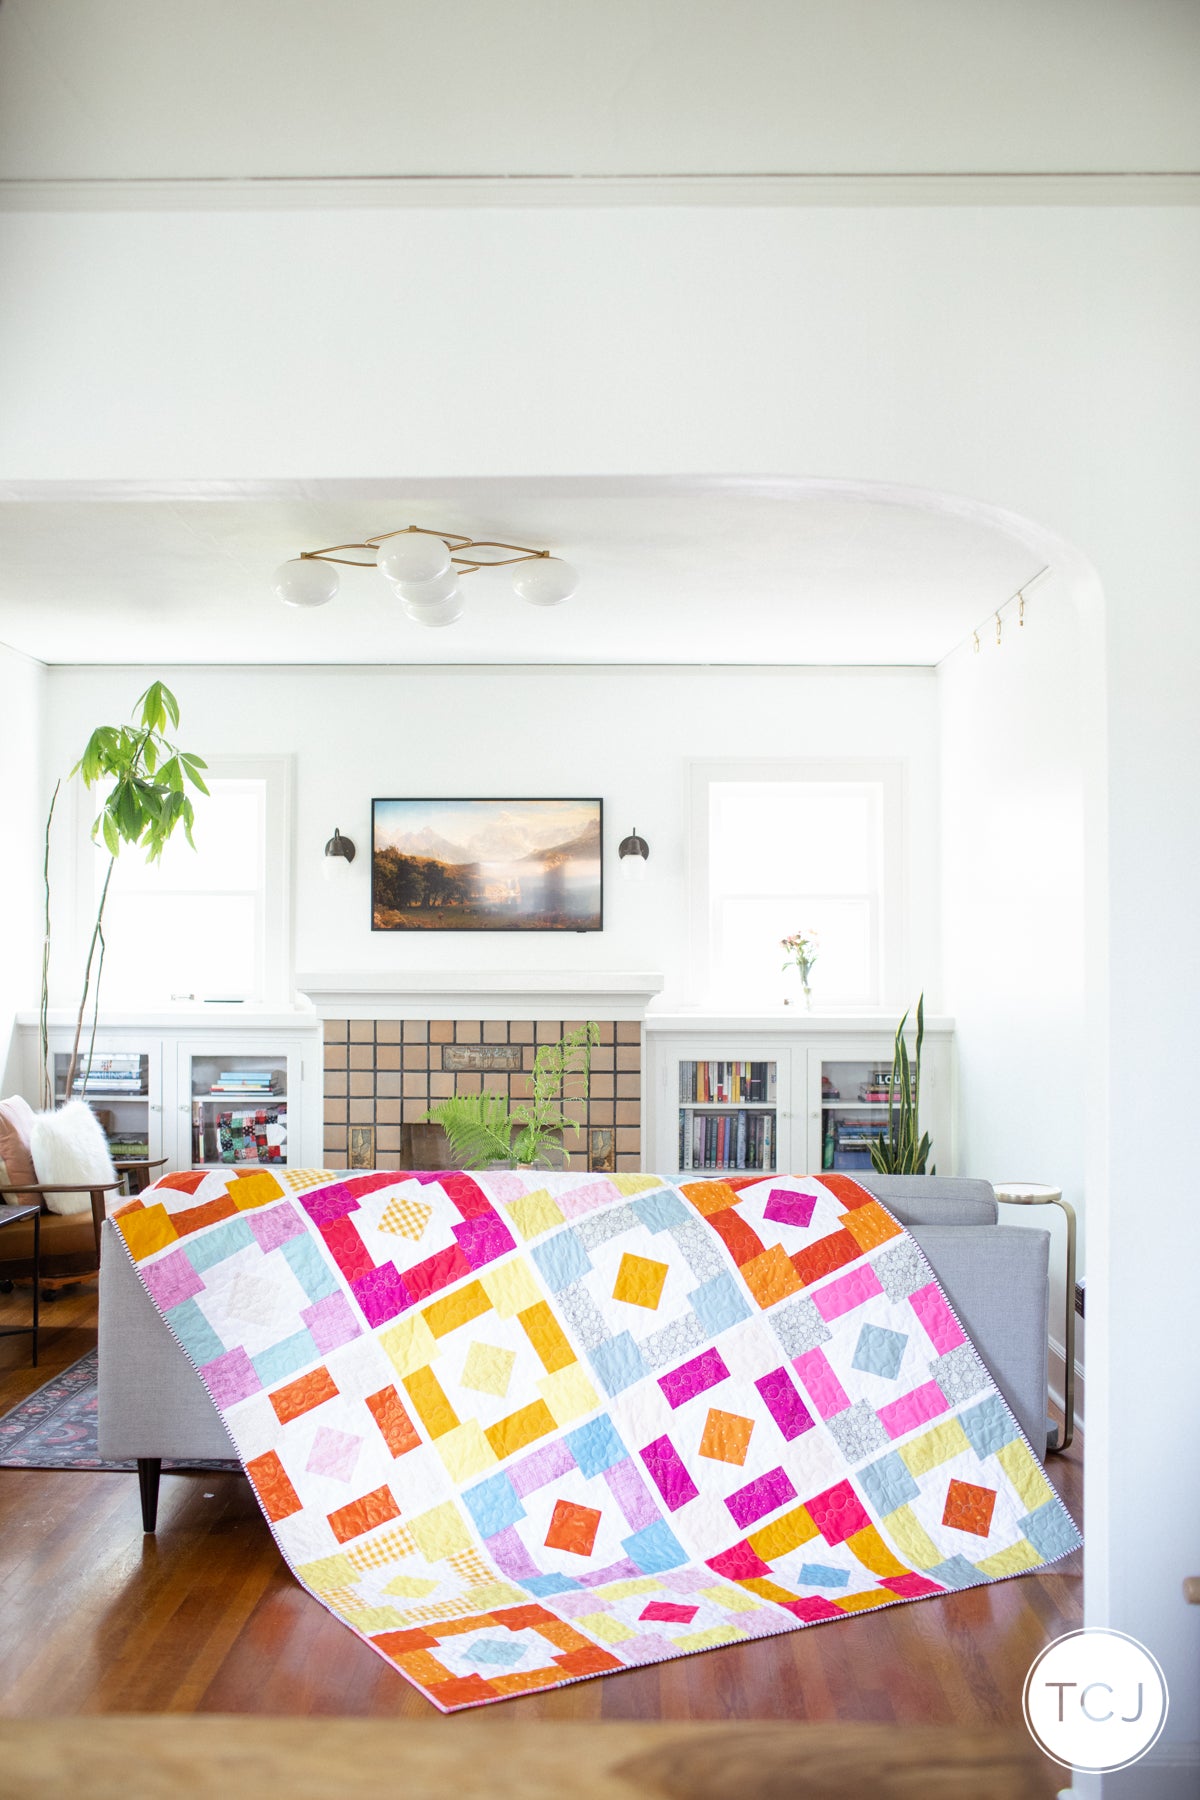 Backyard Party Quilt Pattern - Printed